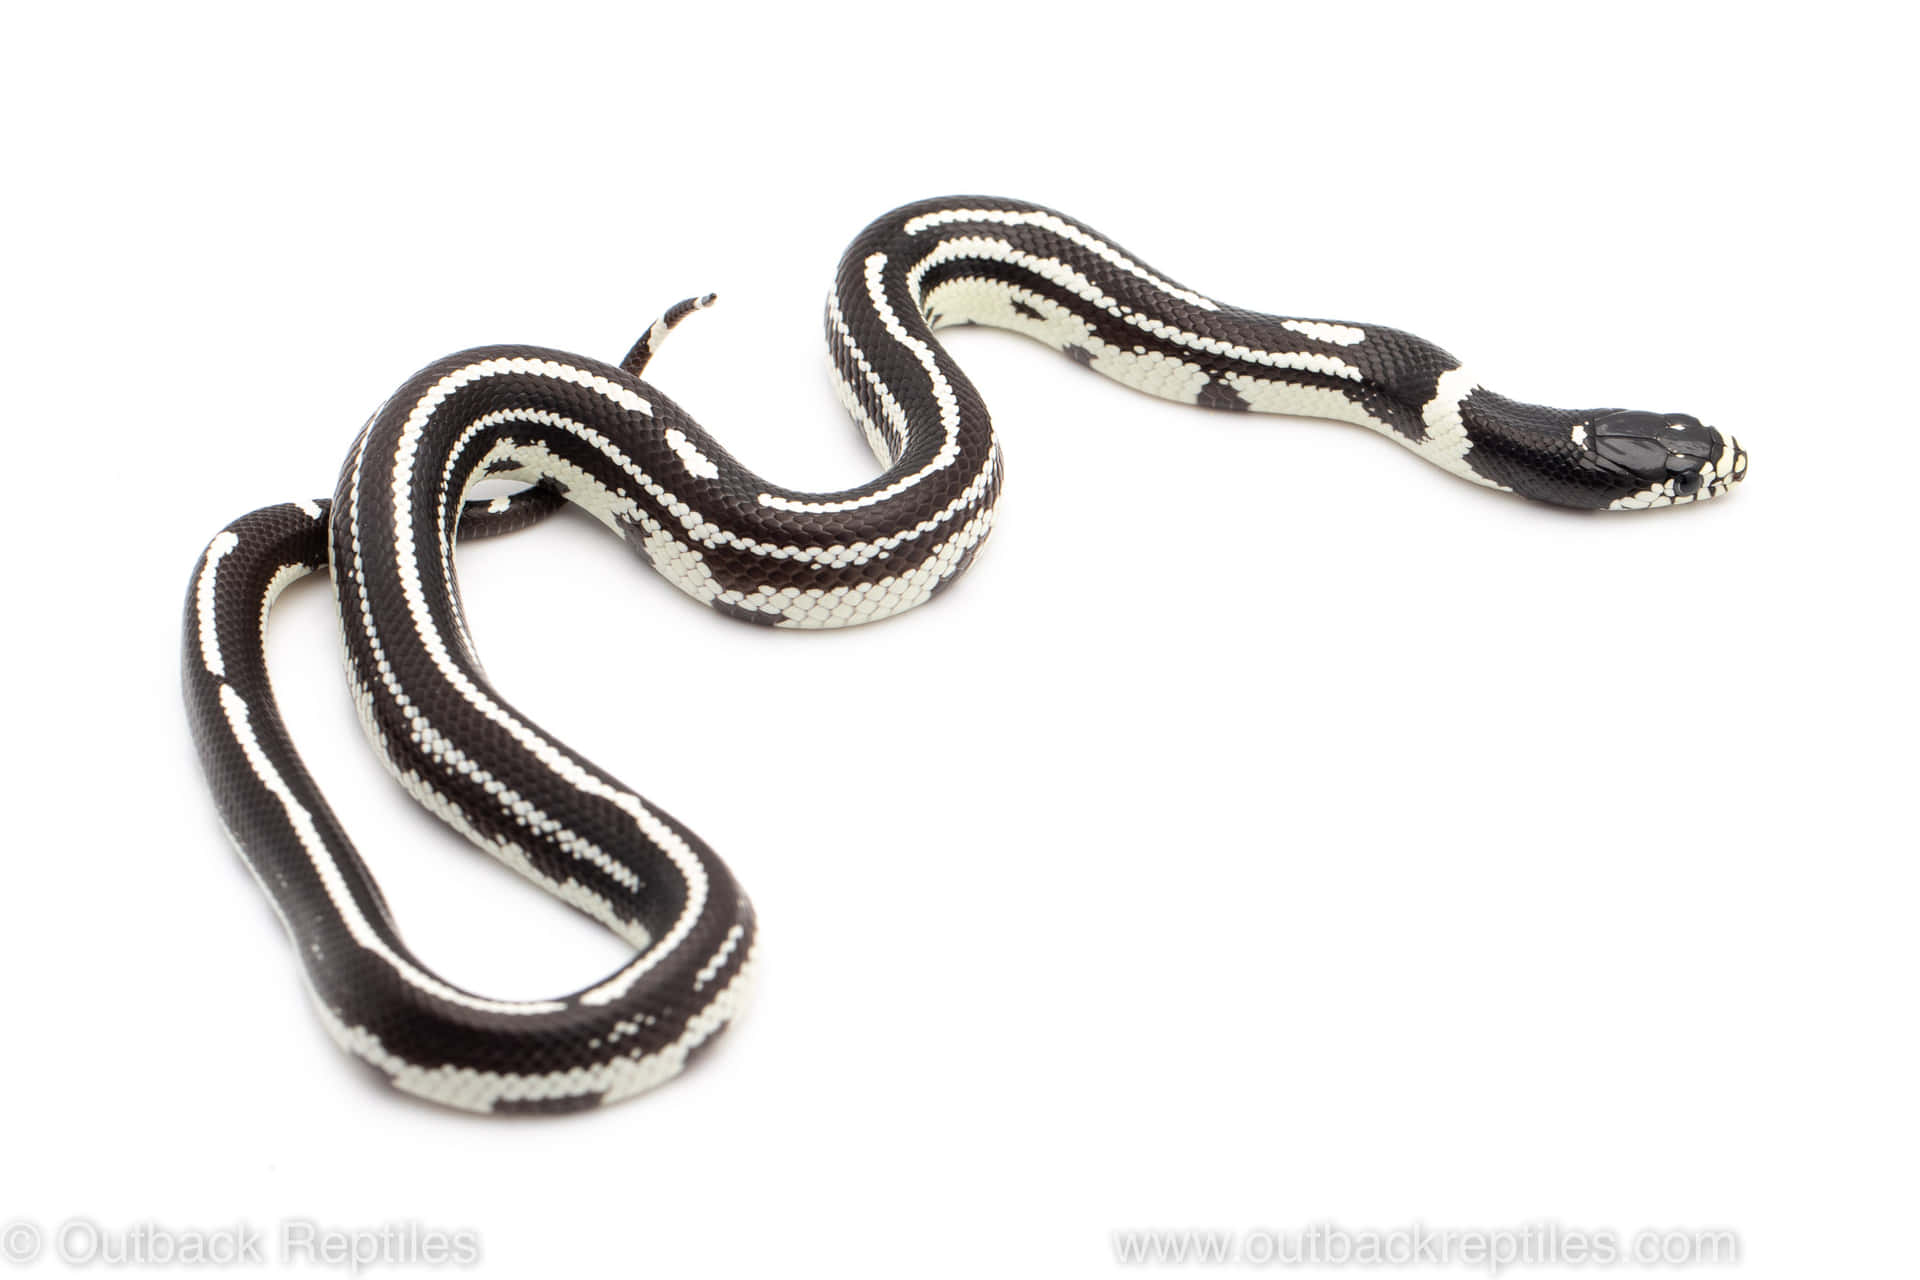 A Black And White Snake On A White Background